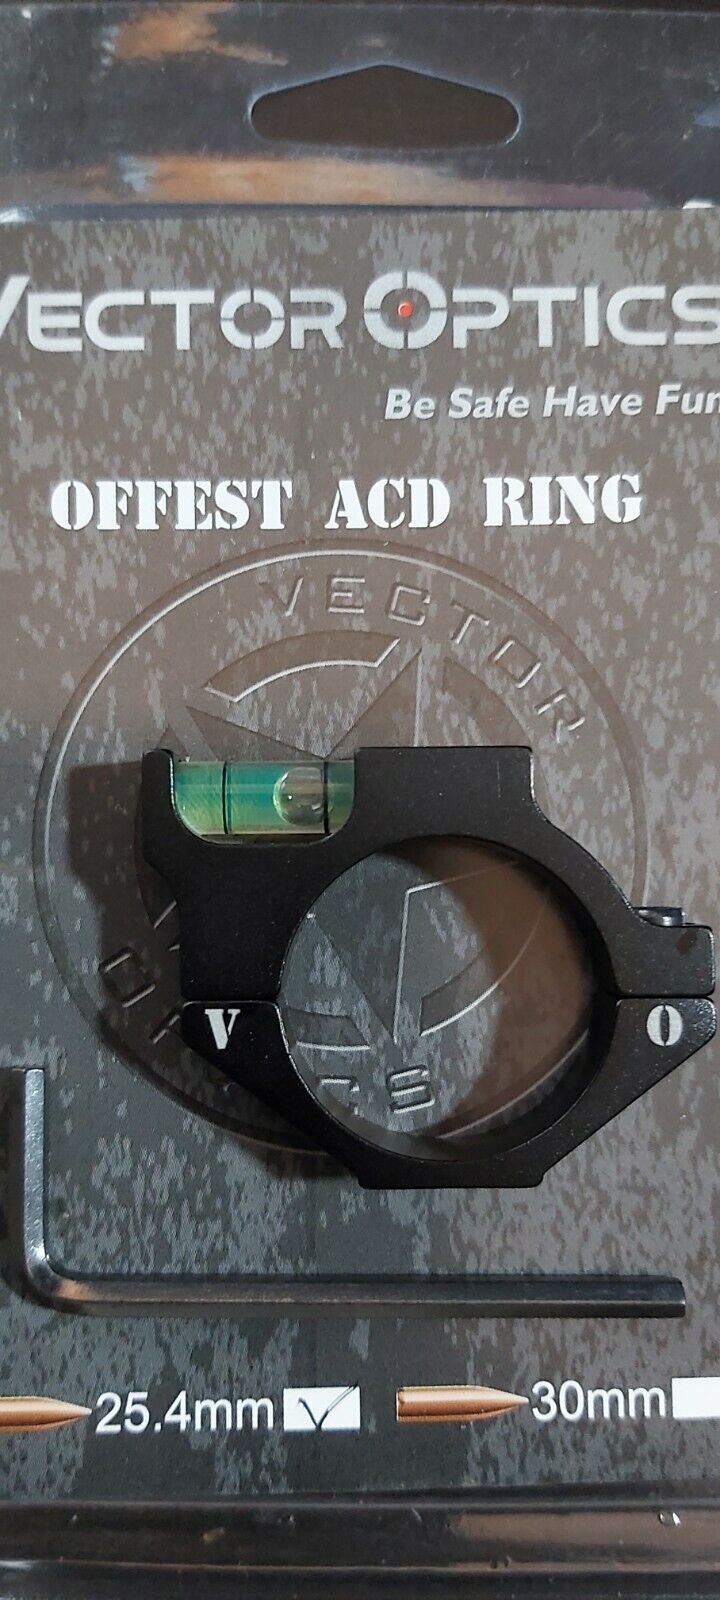 Vector Optics 1'' offset ACD Rifle Scope Bubble Level Rings 25.4mm new in packag